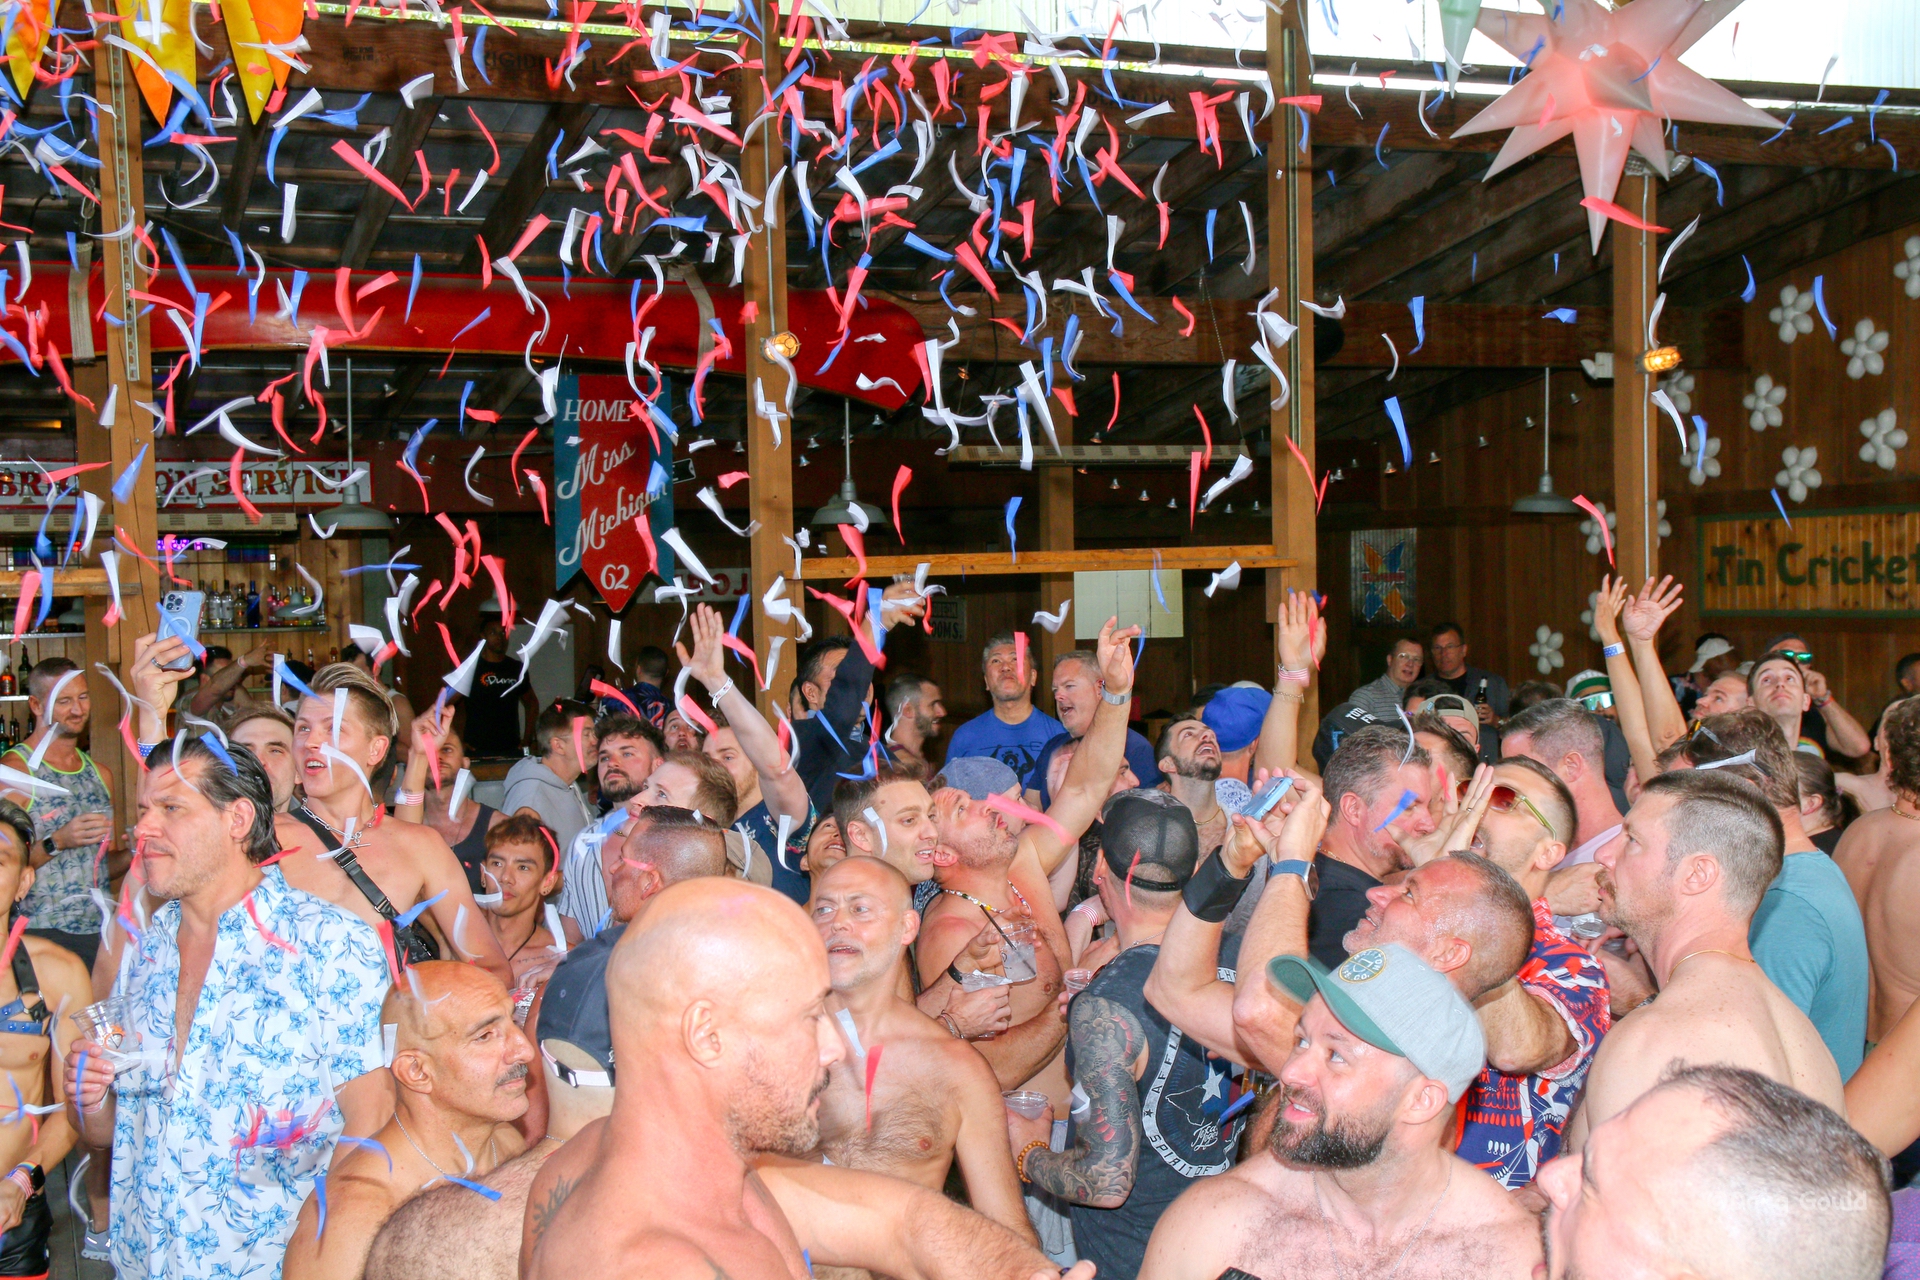 Dunes guest dancing to music with red, white, and blue confetti falling